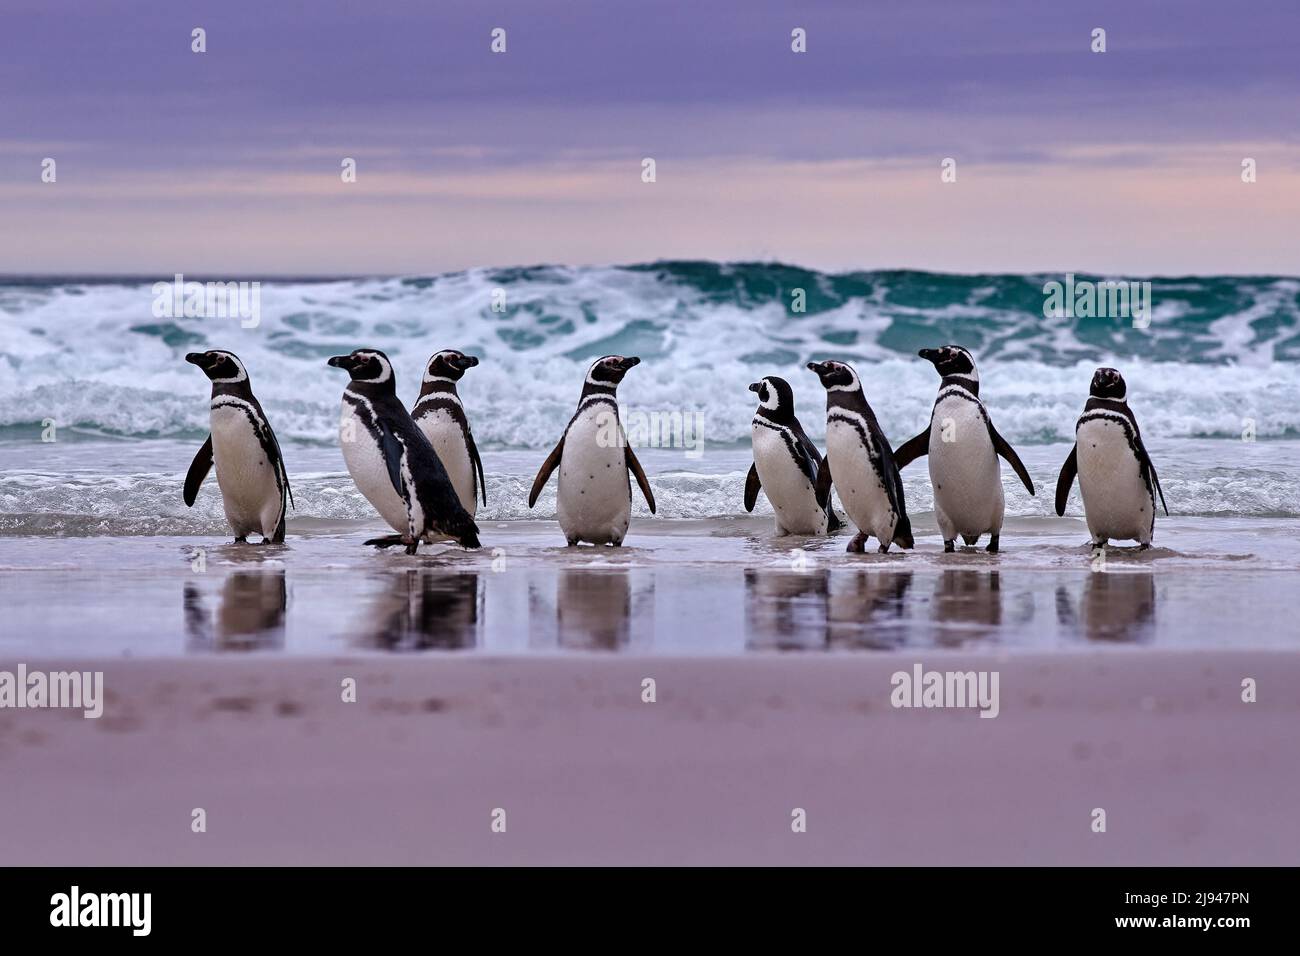 Penguin in the water. Bird playing in sea waves. Sea bird in the water. Magellanic penguin with ocean wave in the background, Falkland Islands, Antarc Stock Photo